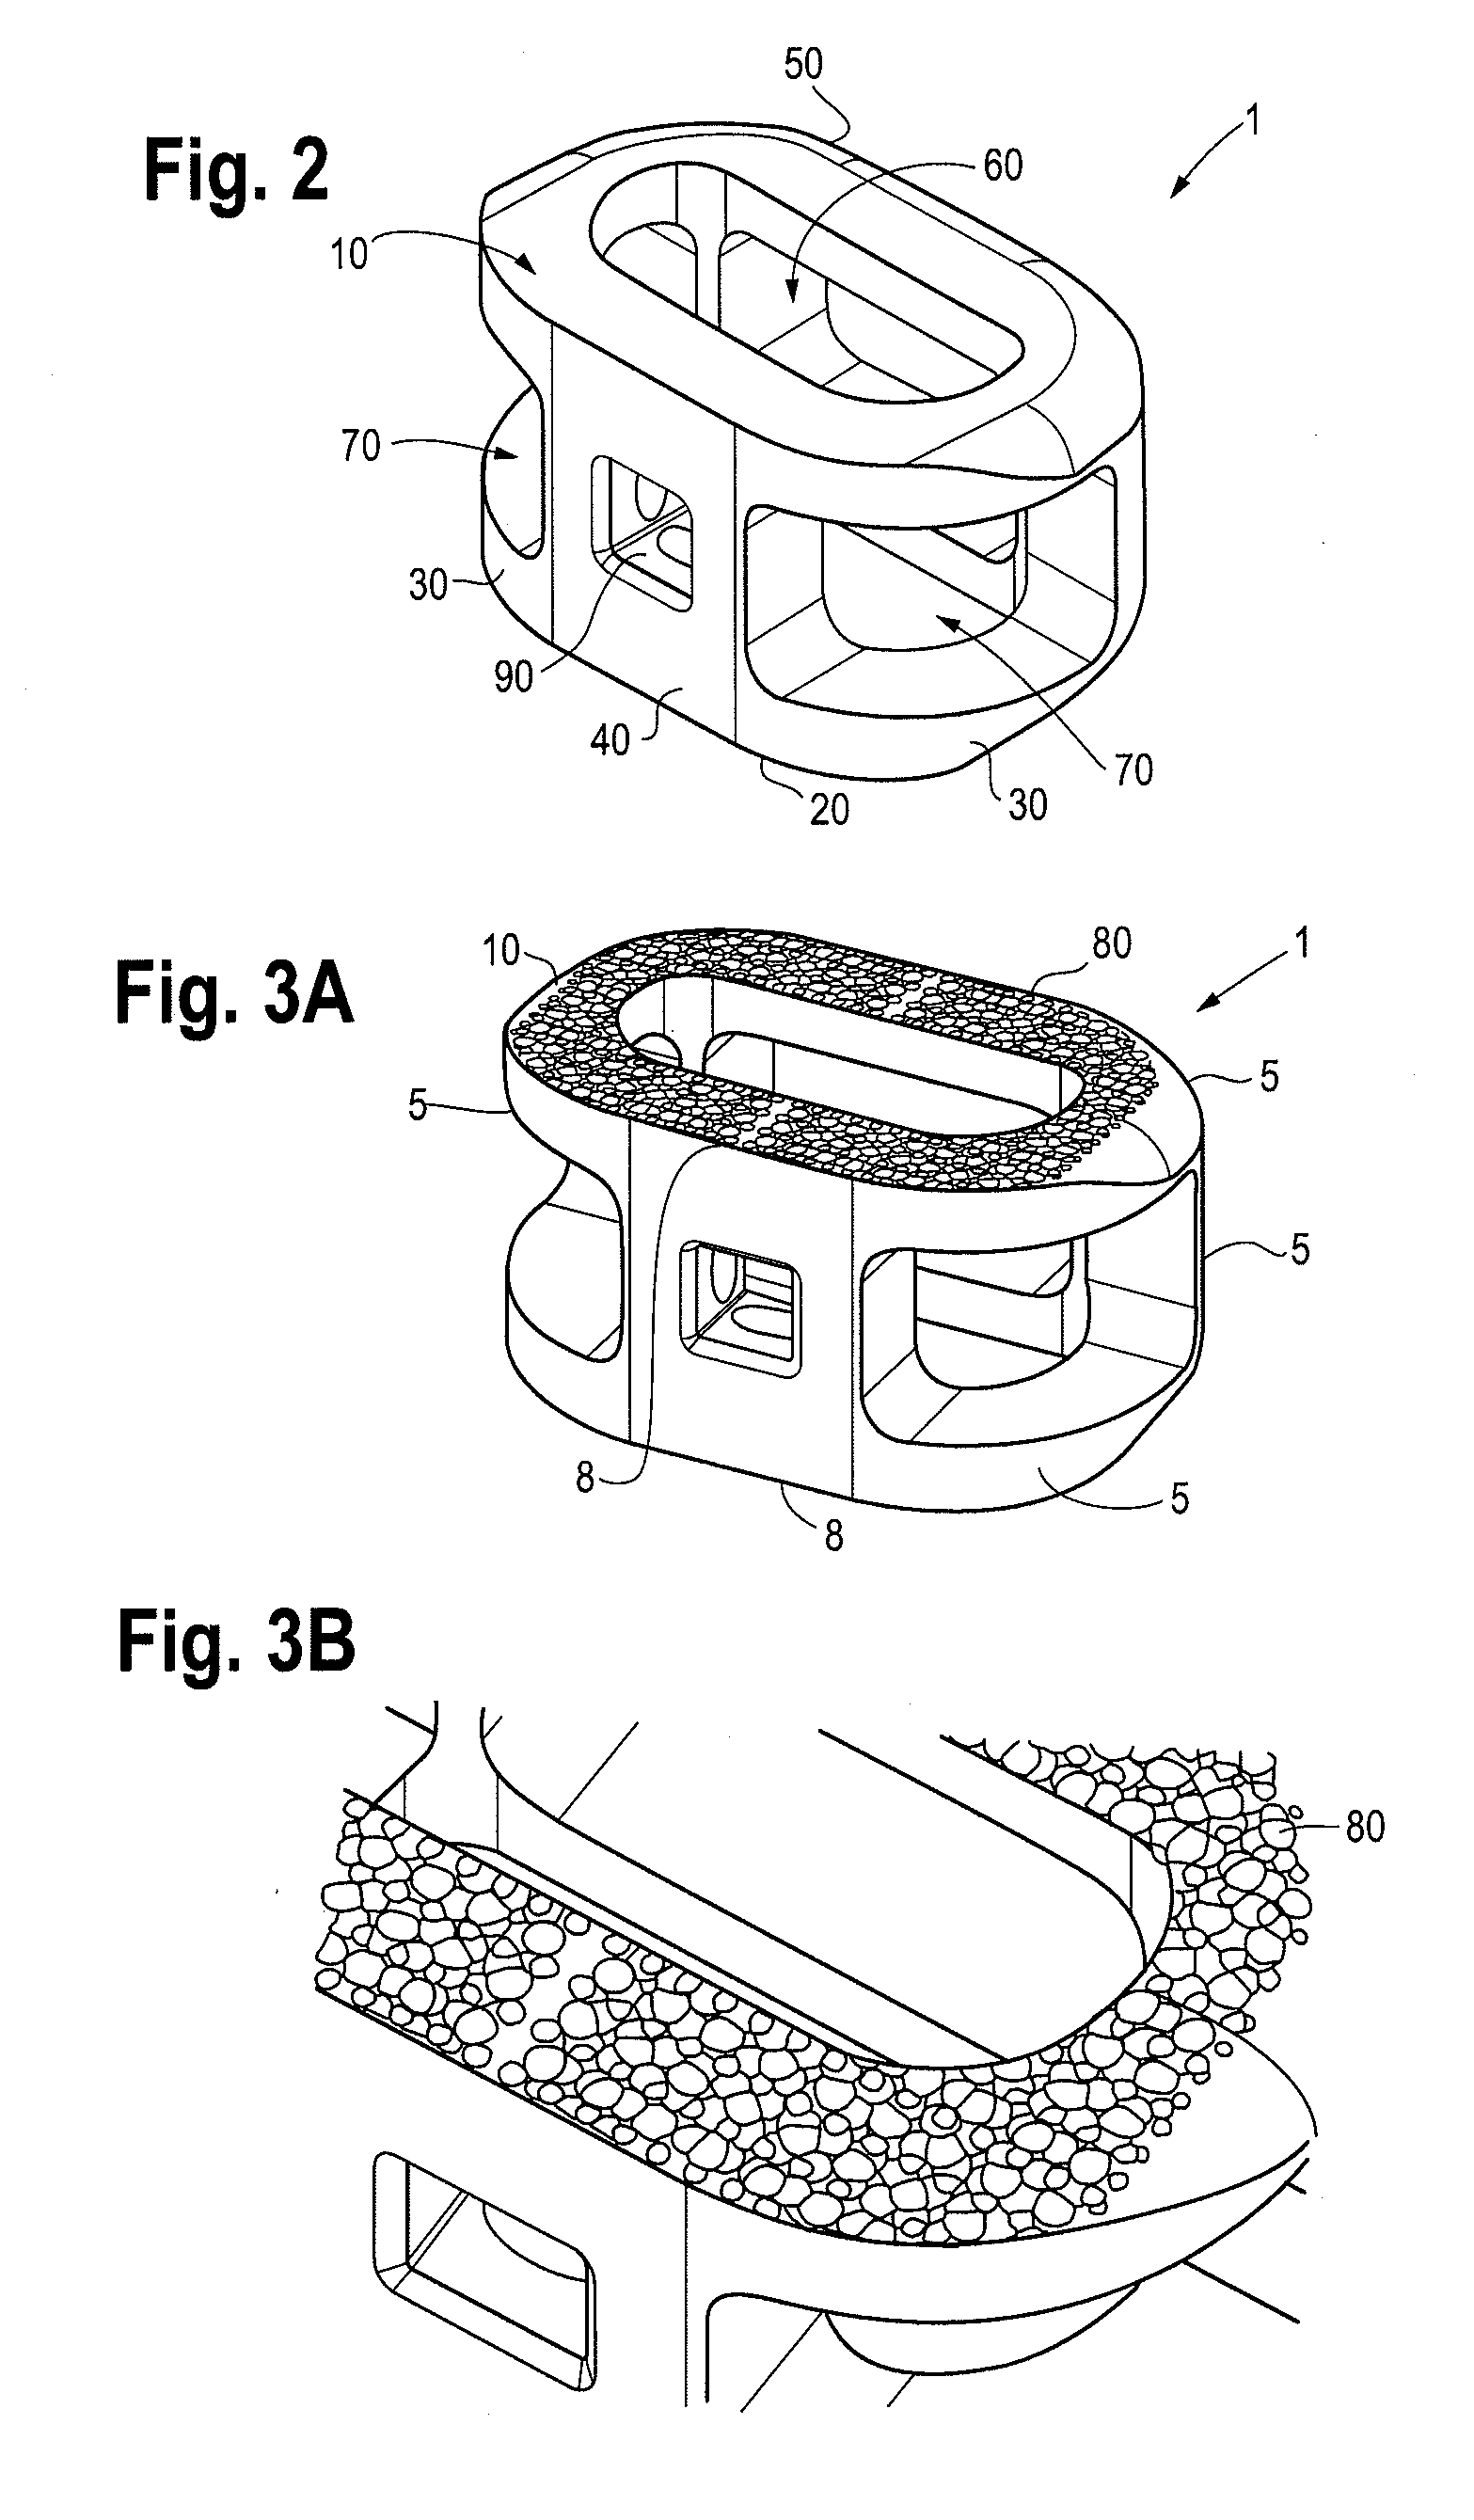 Microstructured implant surfaces